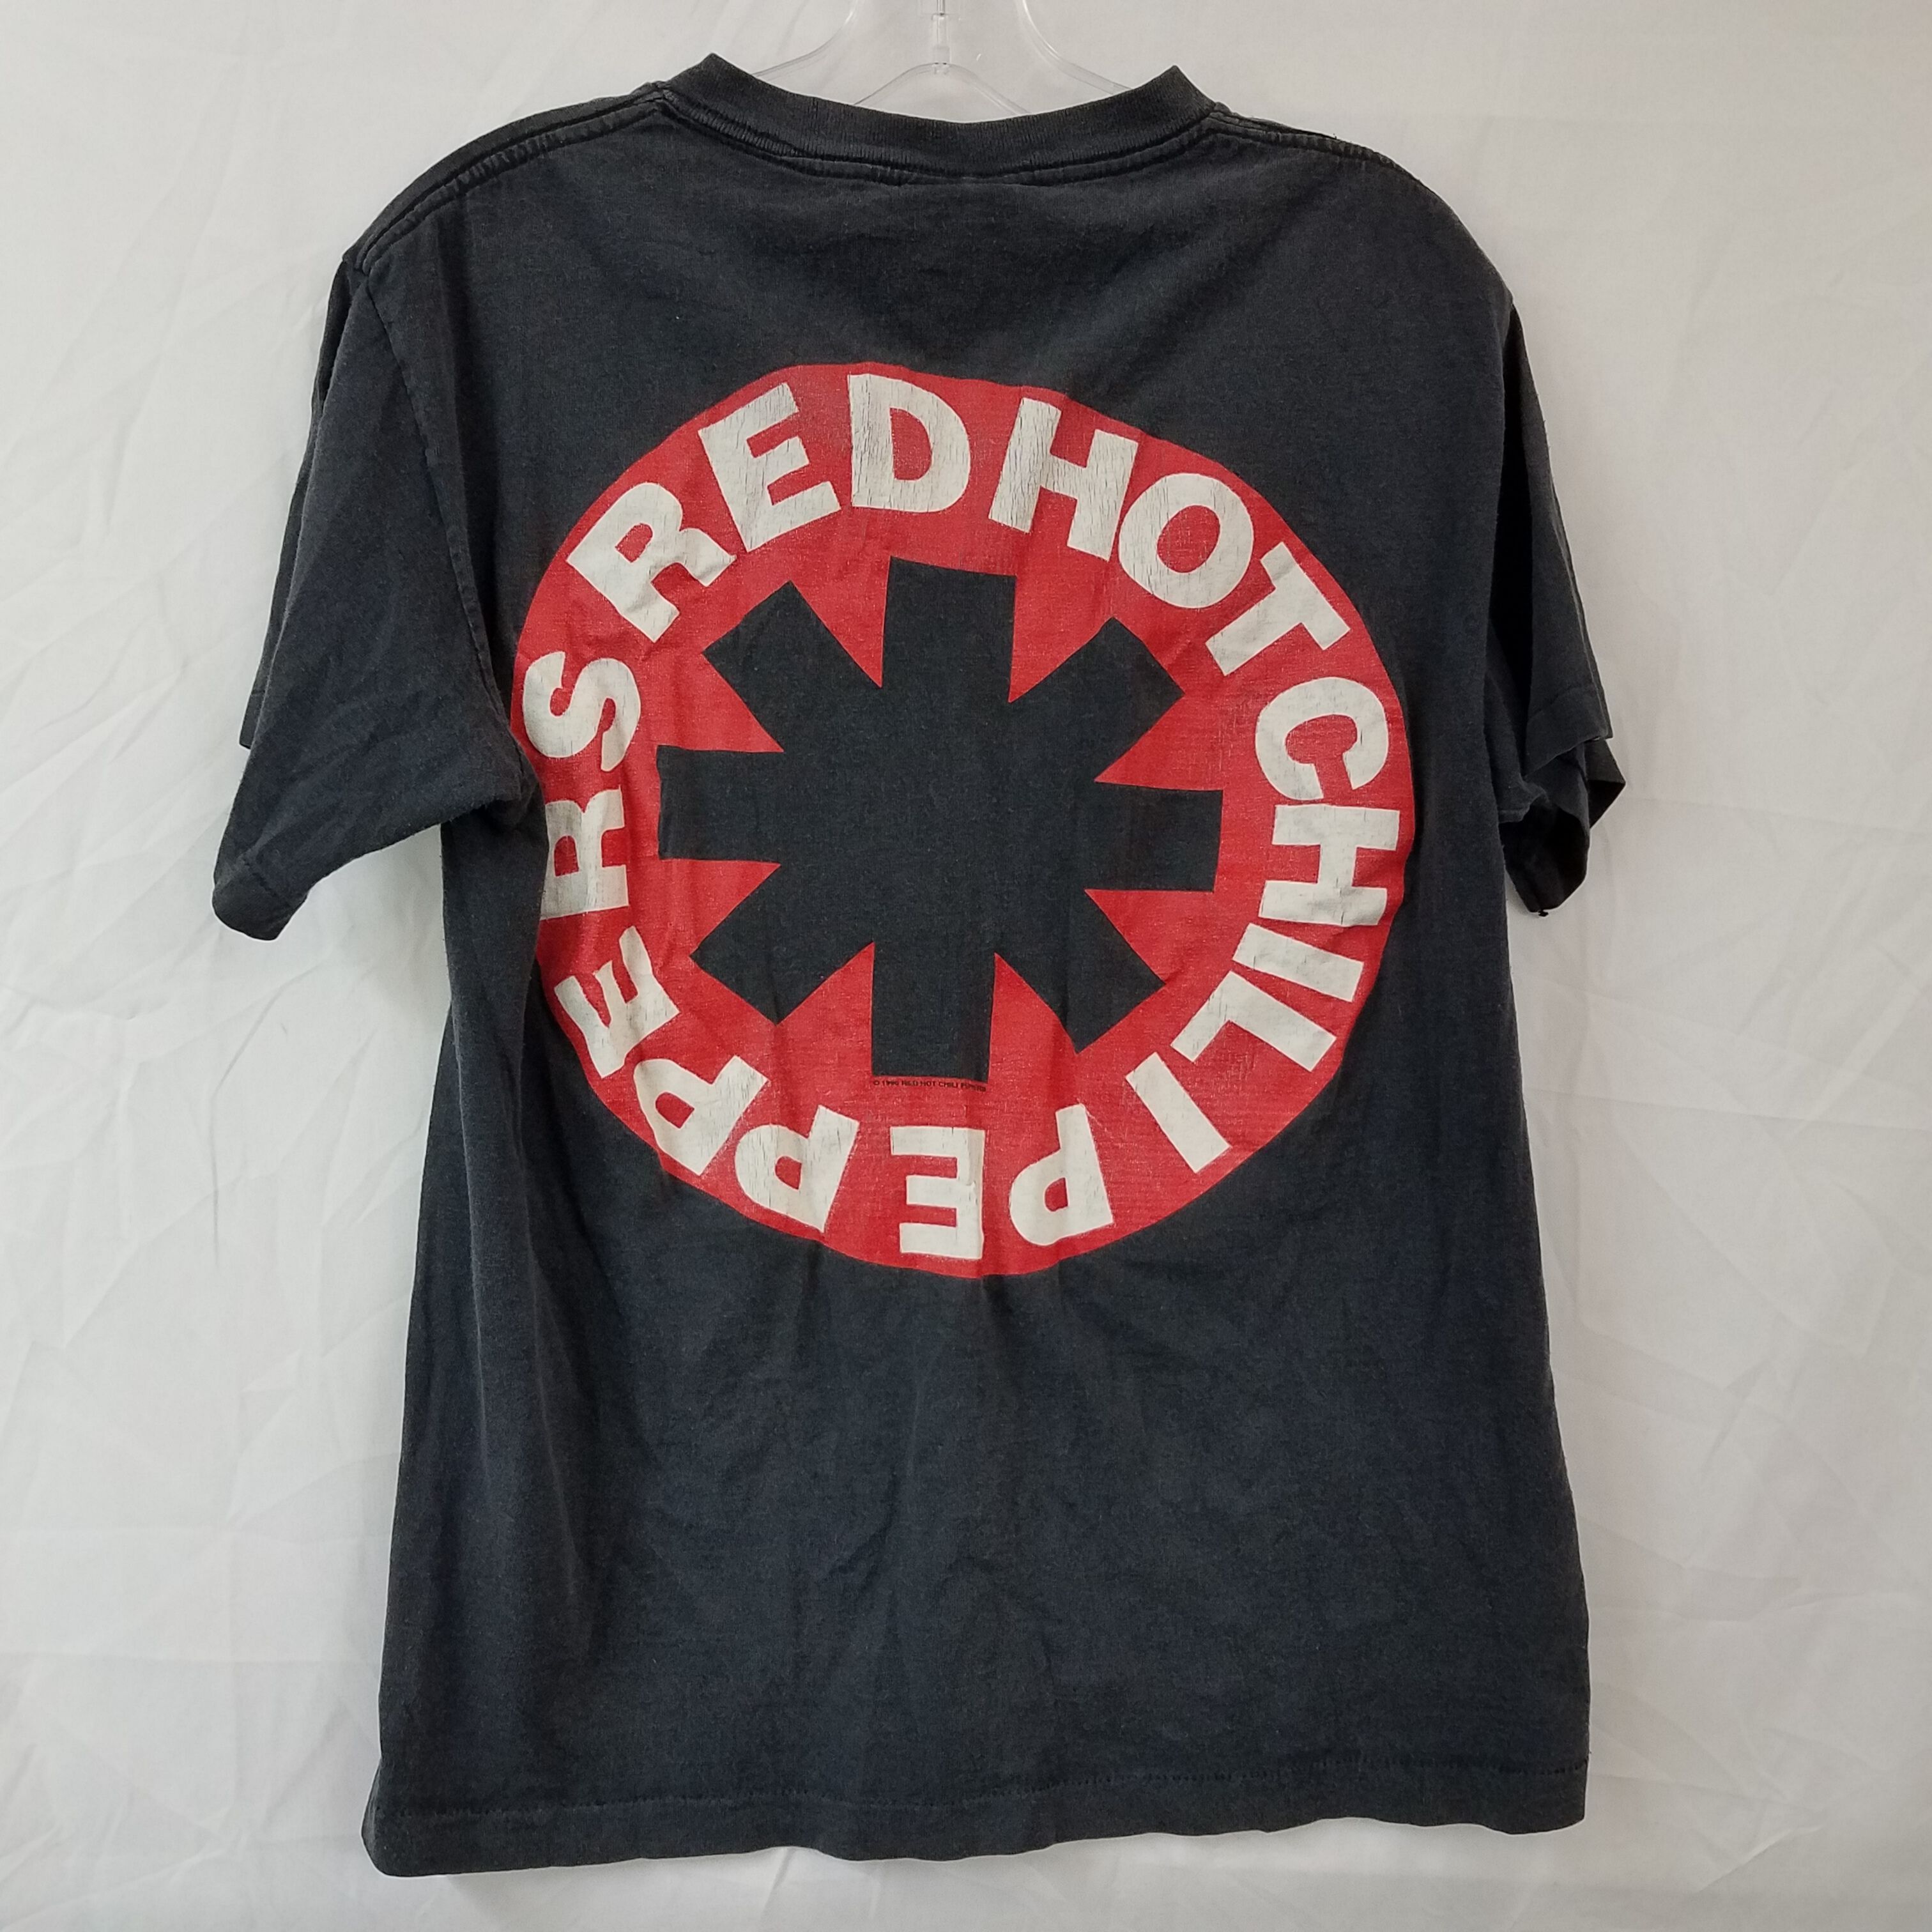 Buy the Vintage 90's Red Hot Chili Peppers T Shirt Frank Kozik